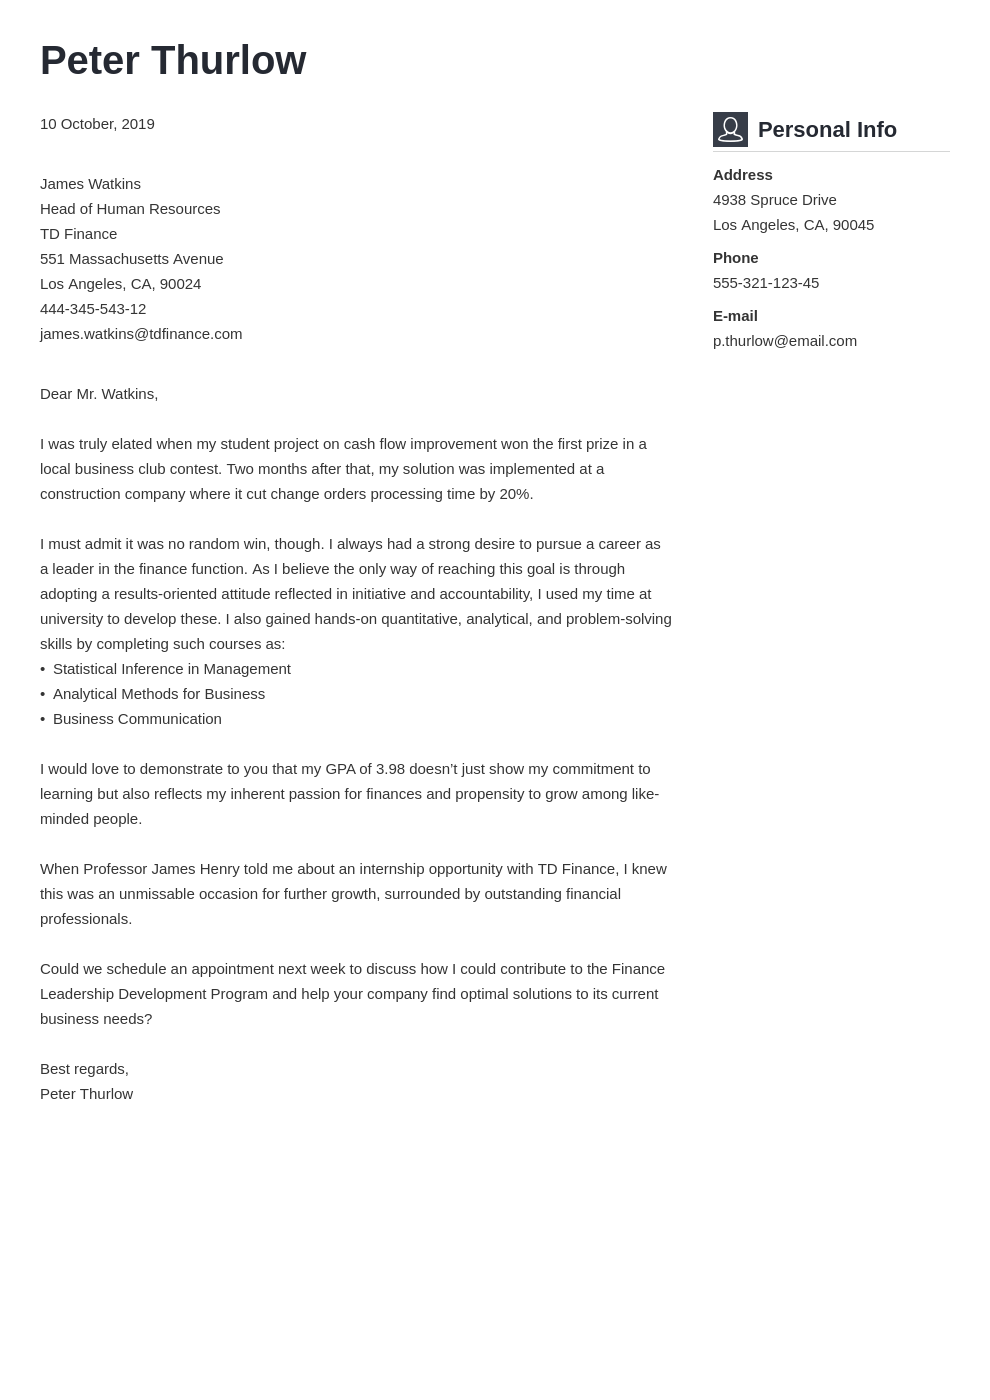 Cover Letter for an Internship: Examples & Tips for All Interns